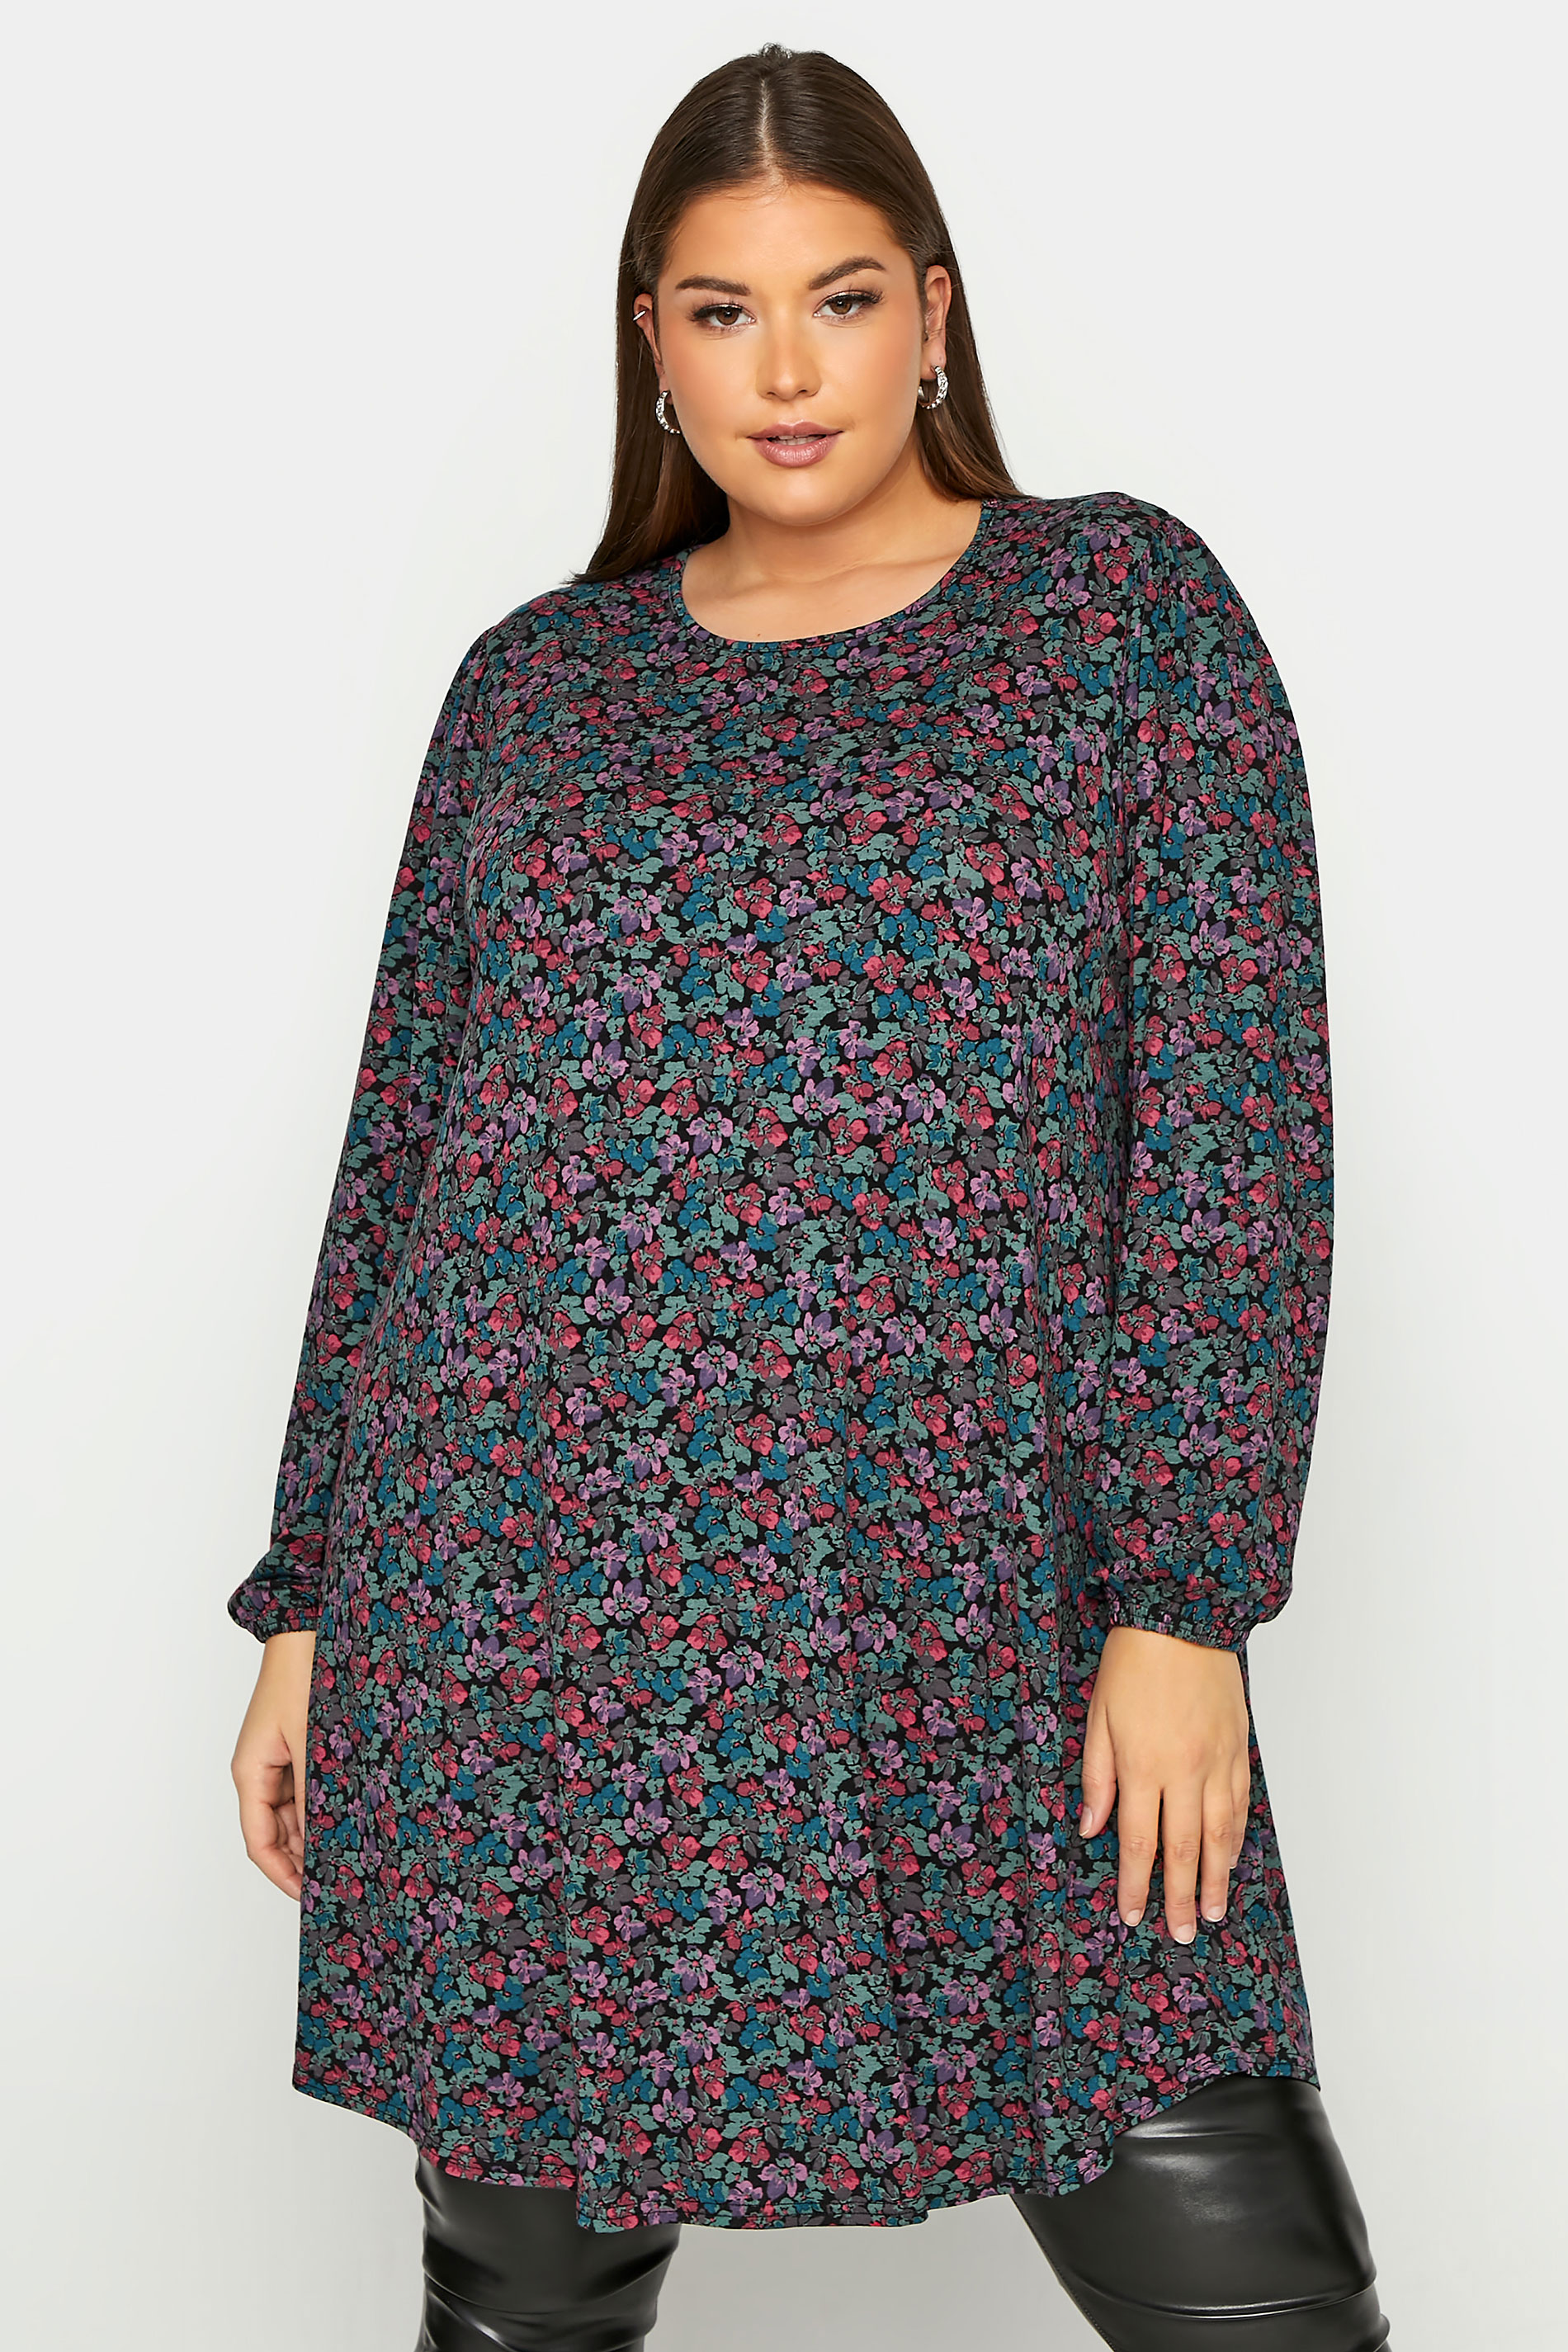 LIMITED COLLECTON Curve Black Ditsy Print Swing Tunic Top_A.jpg